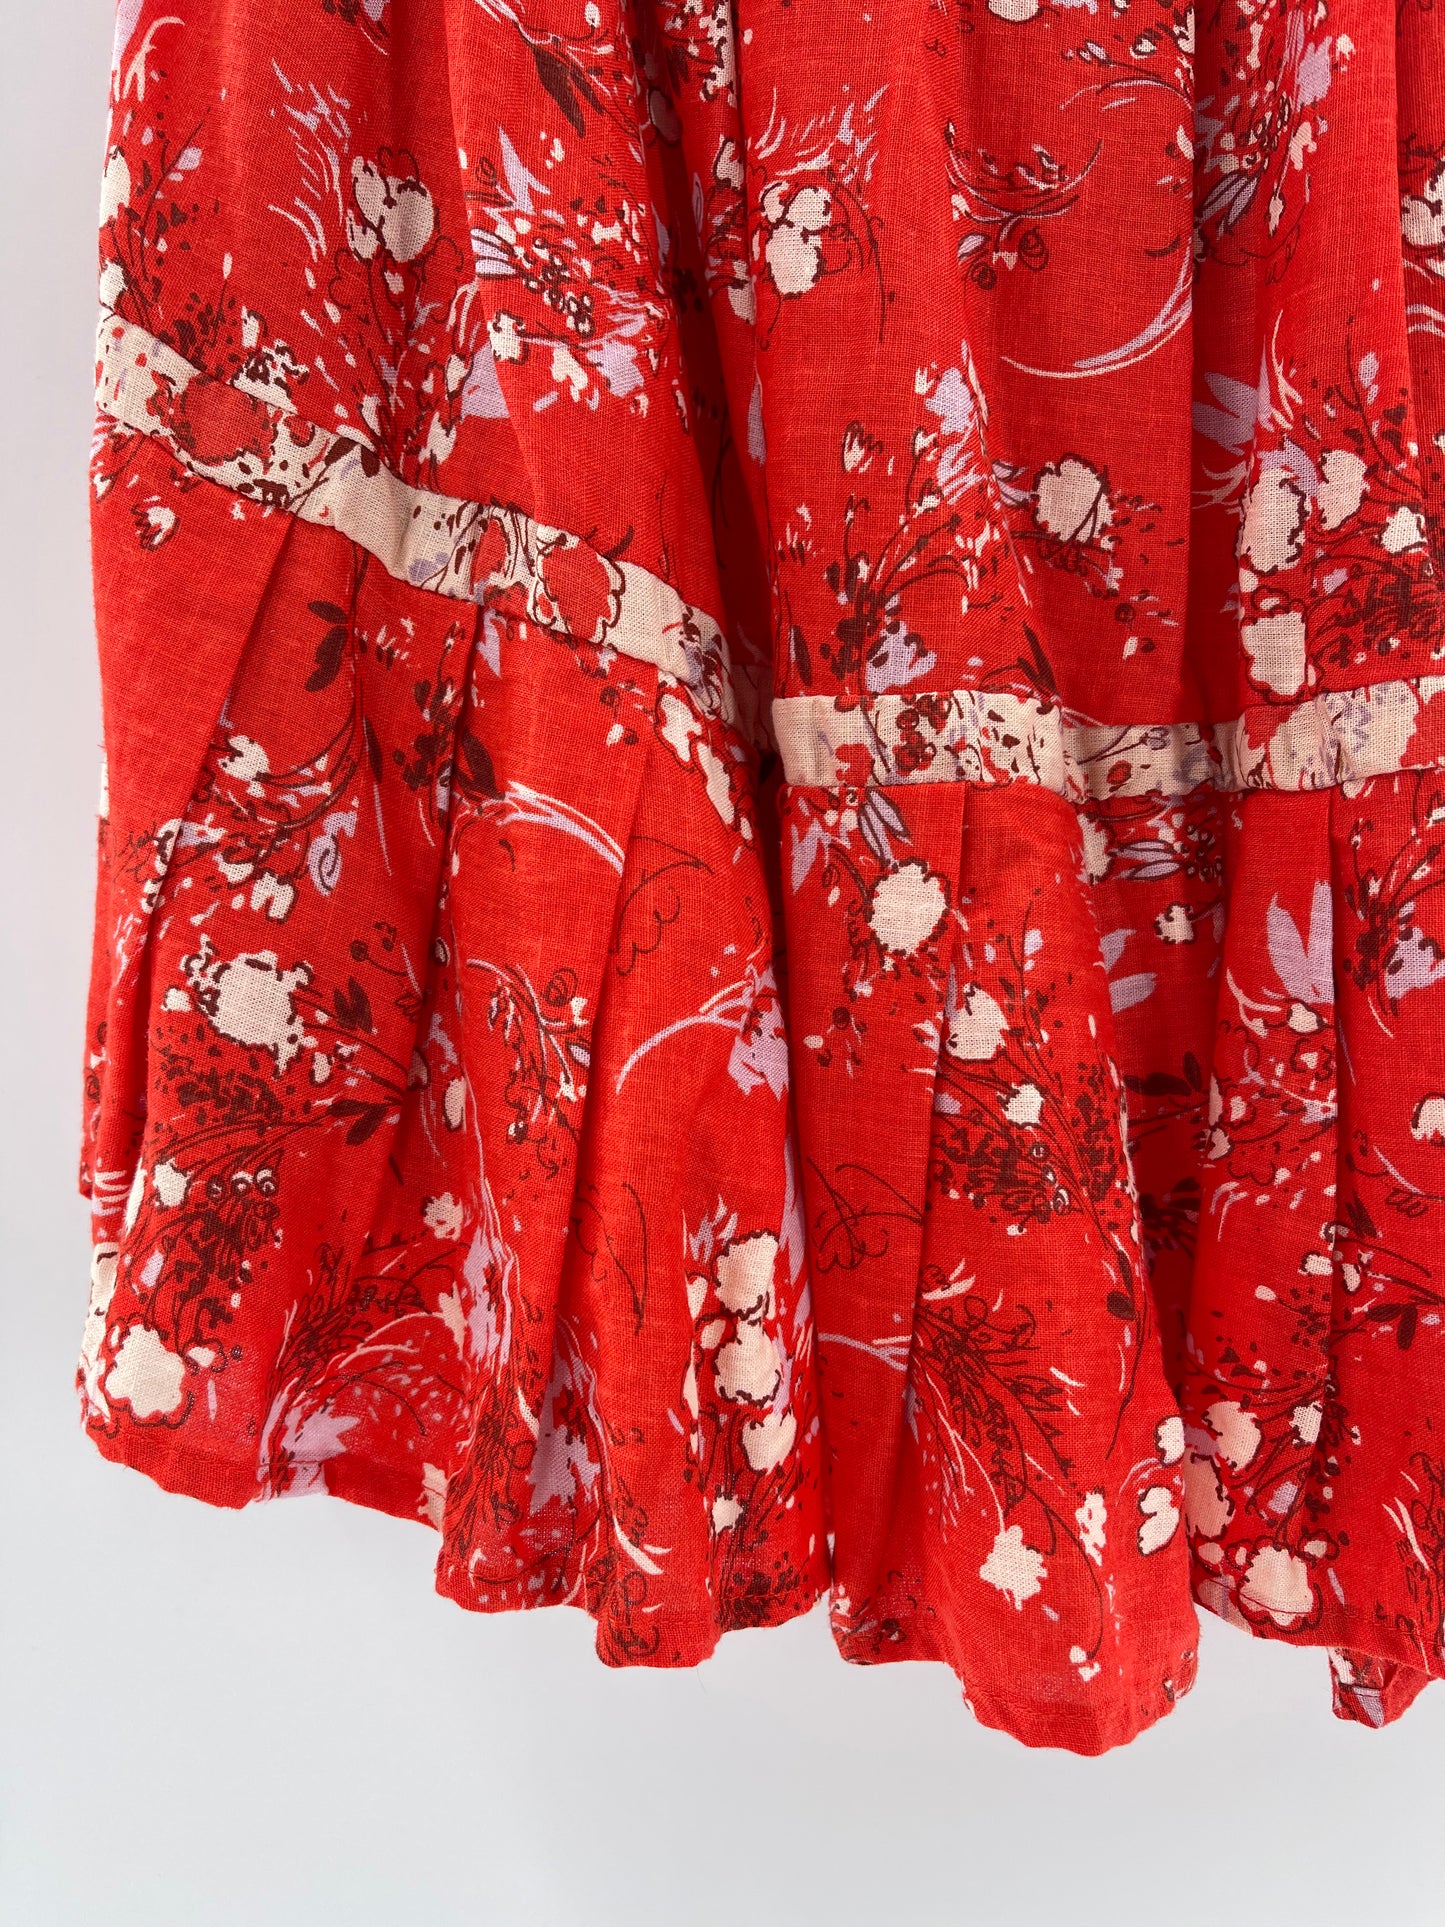 Free People One Shoulder Red Floral Mini Dress (Size XS)